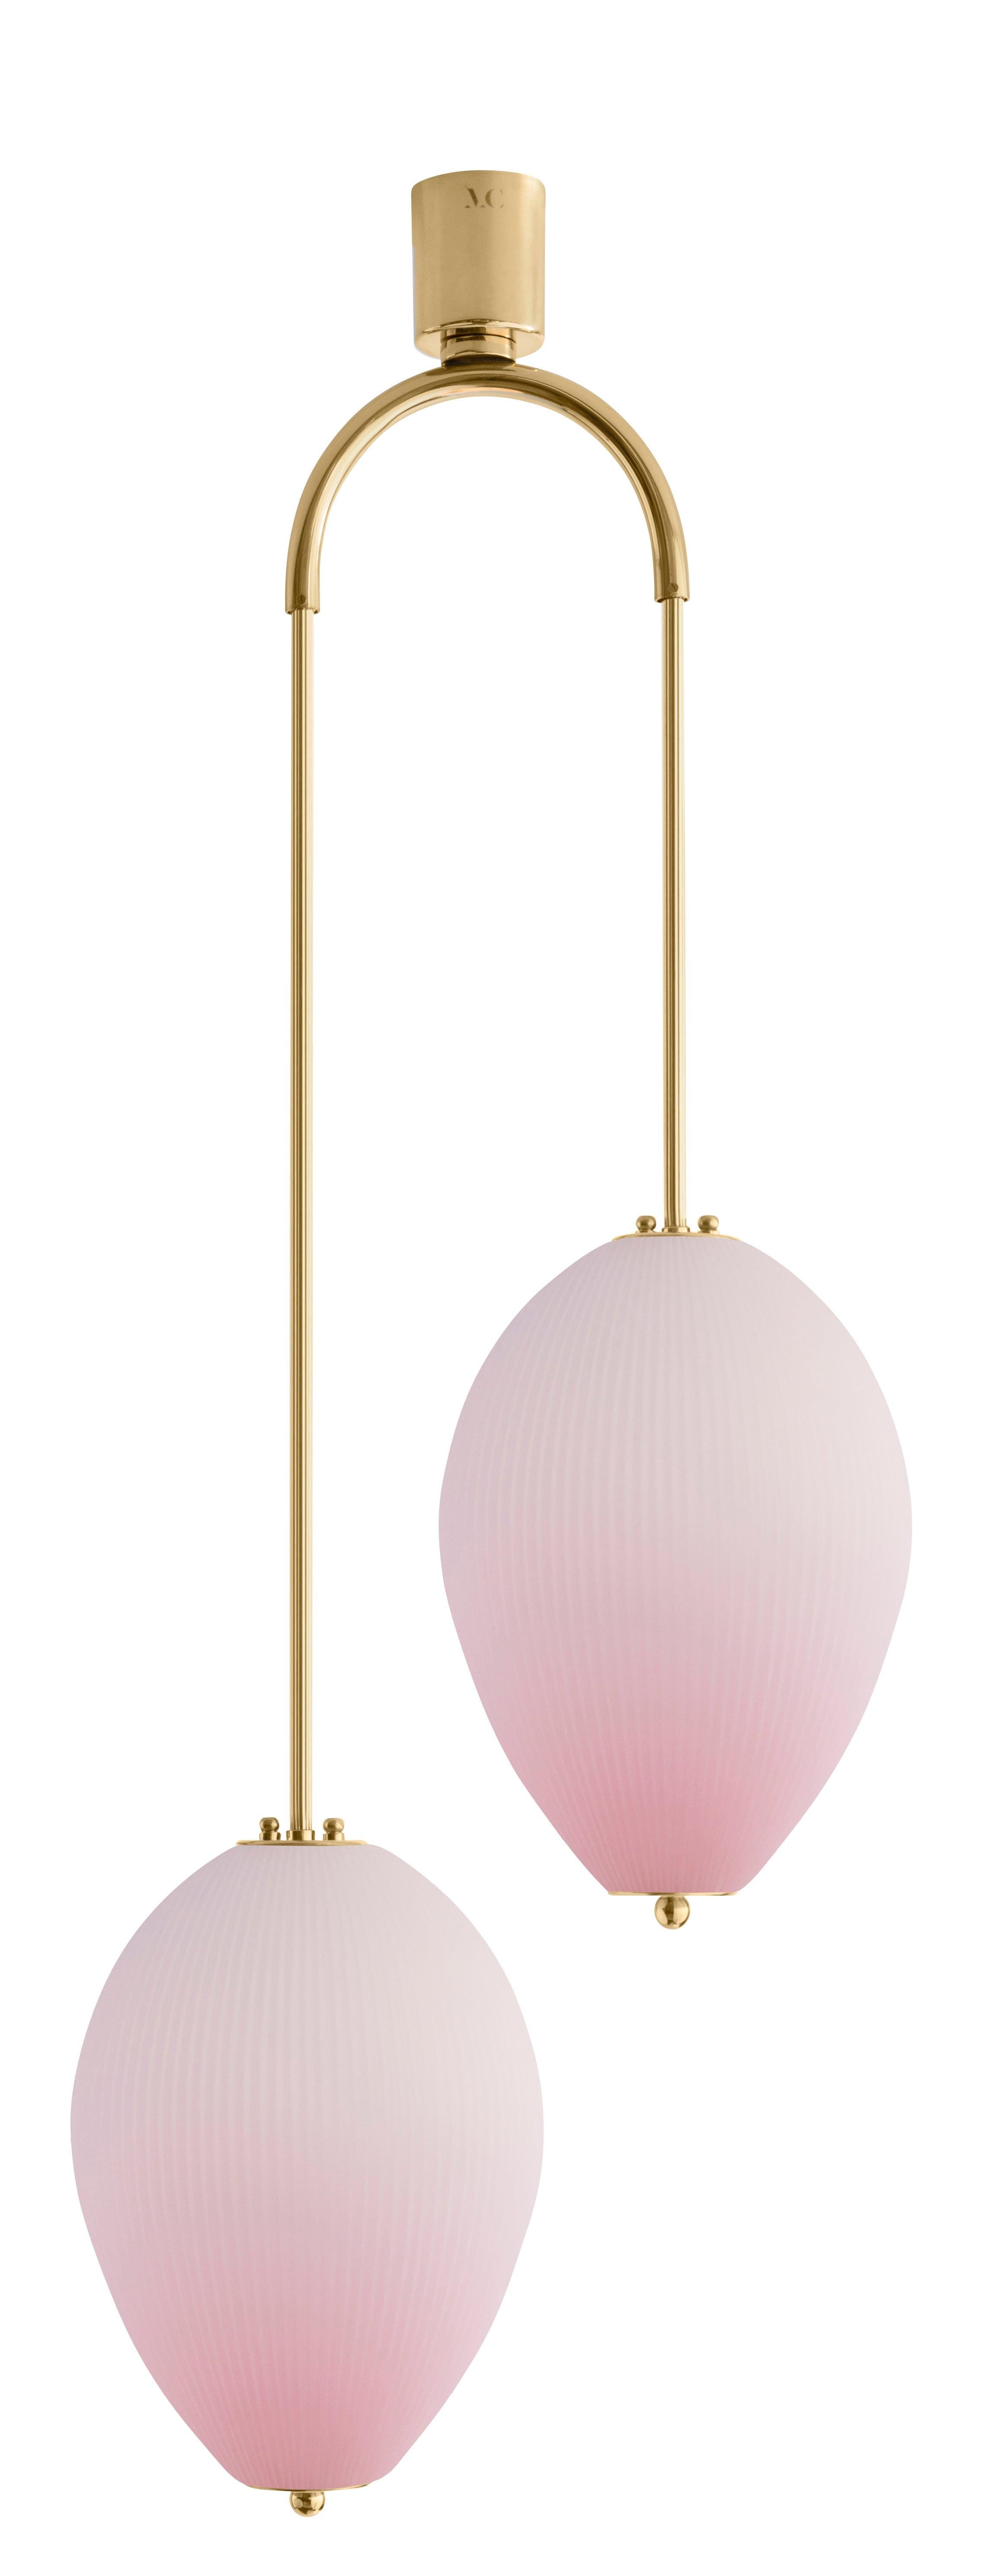 Double chandelier China 10 by Magic Circus Editions
Dimensions: H 121.5 x W 44.3 x D 25.2 cm
Materials: Brass, mouth blown glass sculpted with a diamond saw
Colour: soft rose

Available finishes: Brass, nickel
Available colours: enamel soft